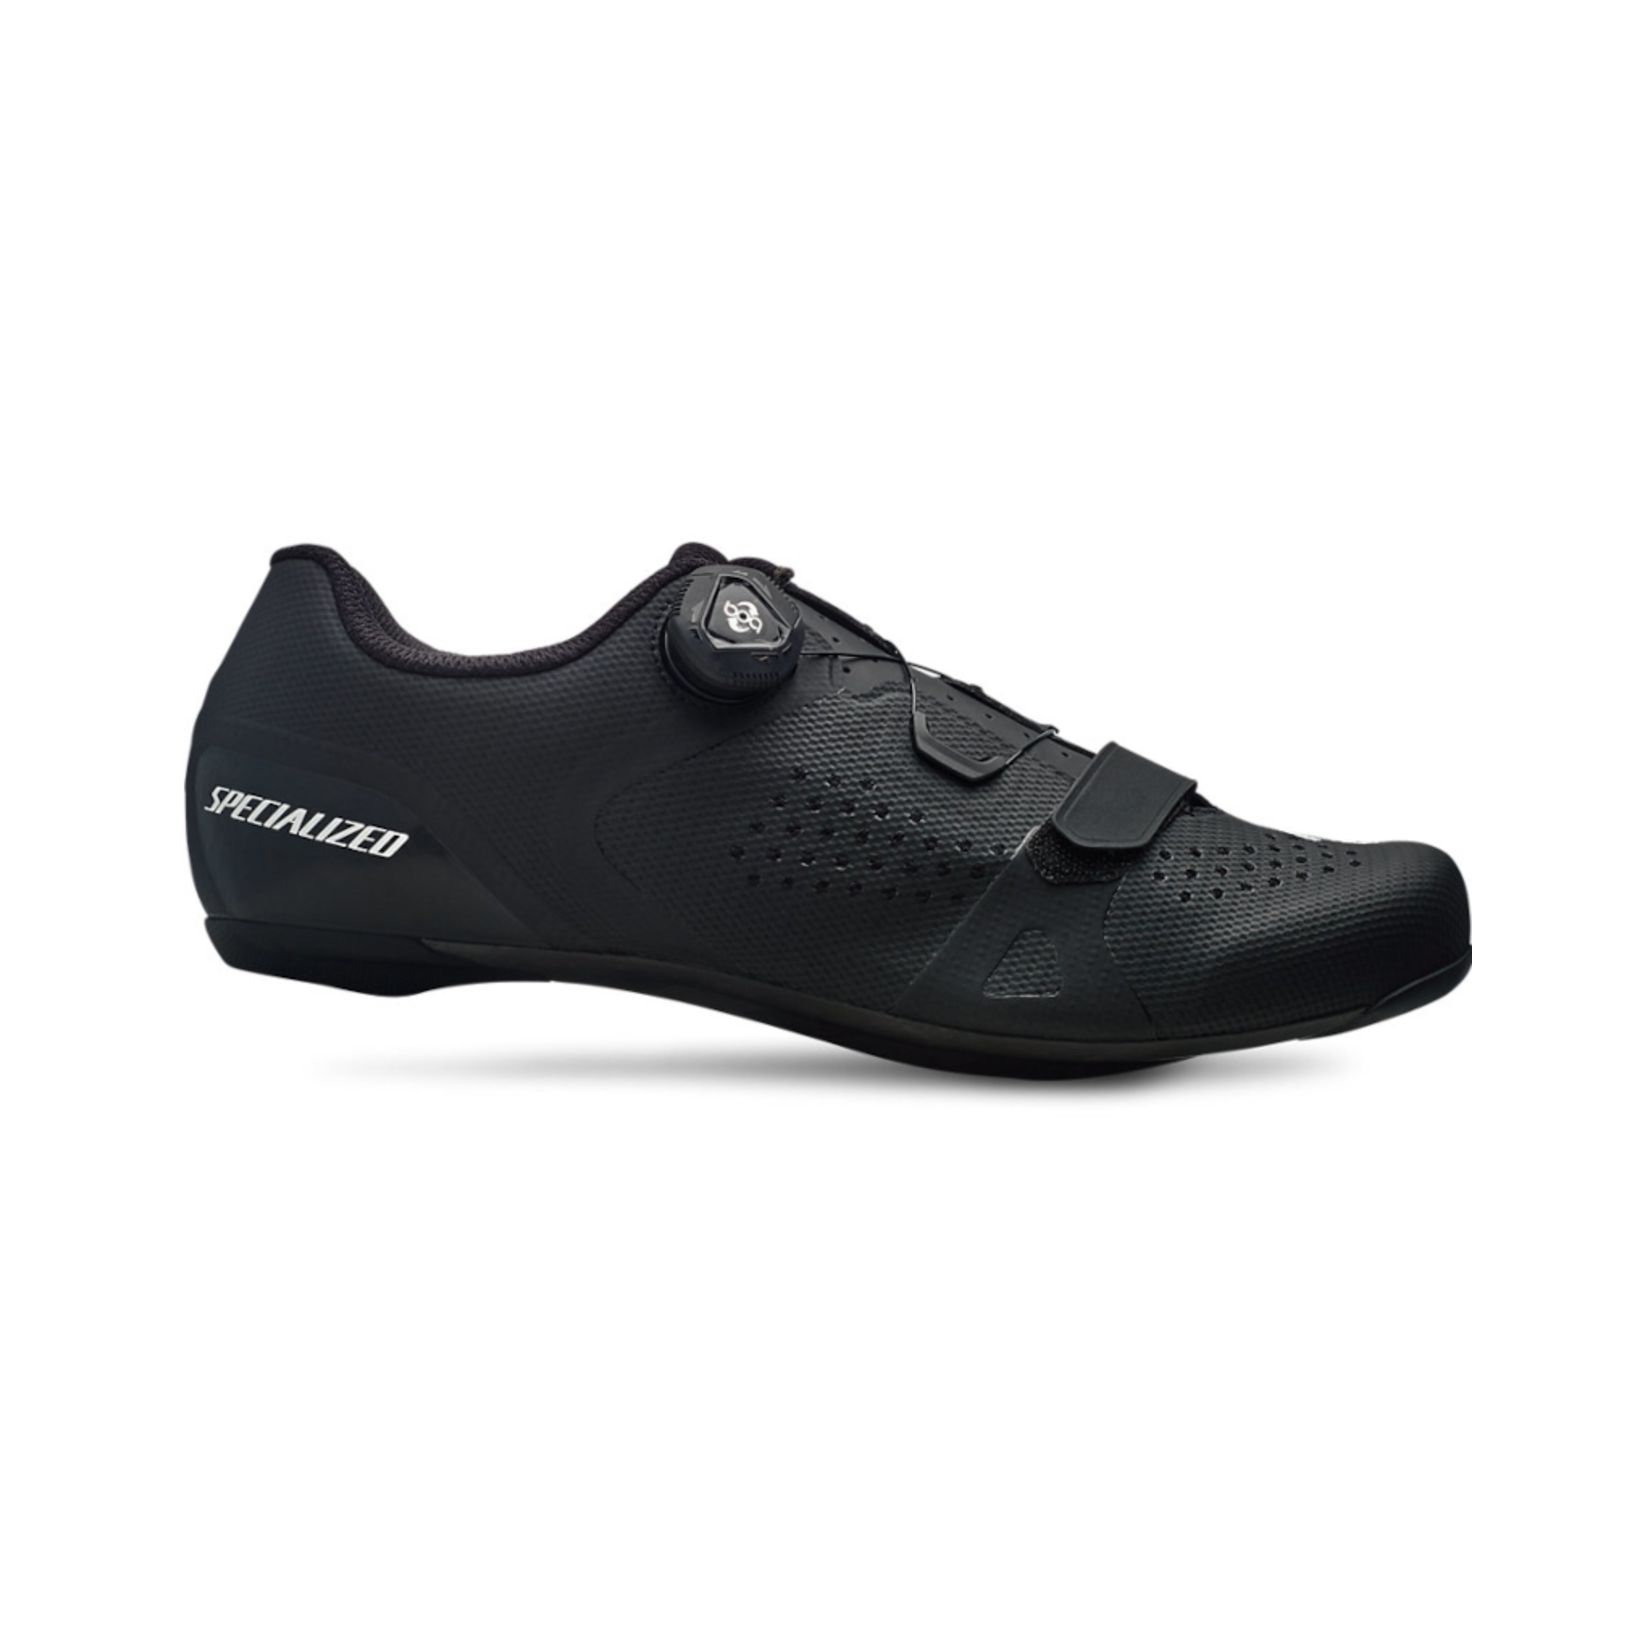 Specialized Torch 2.0 Road Shoe - Wide